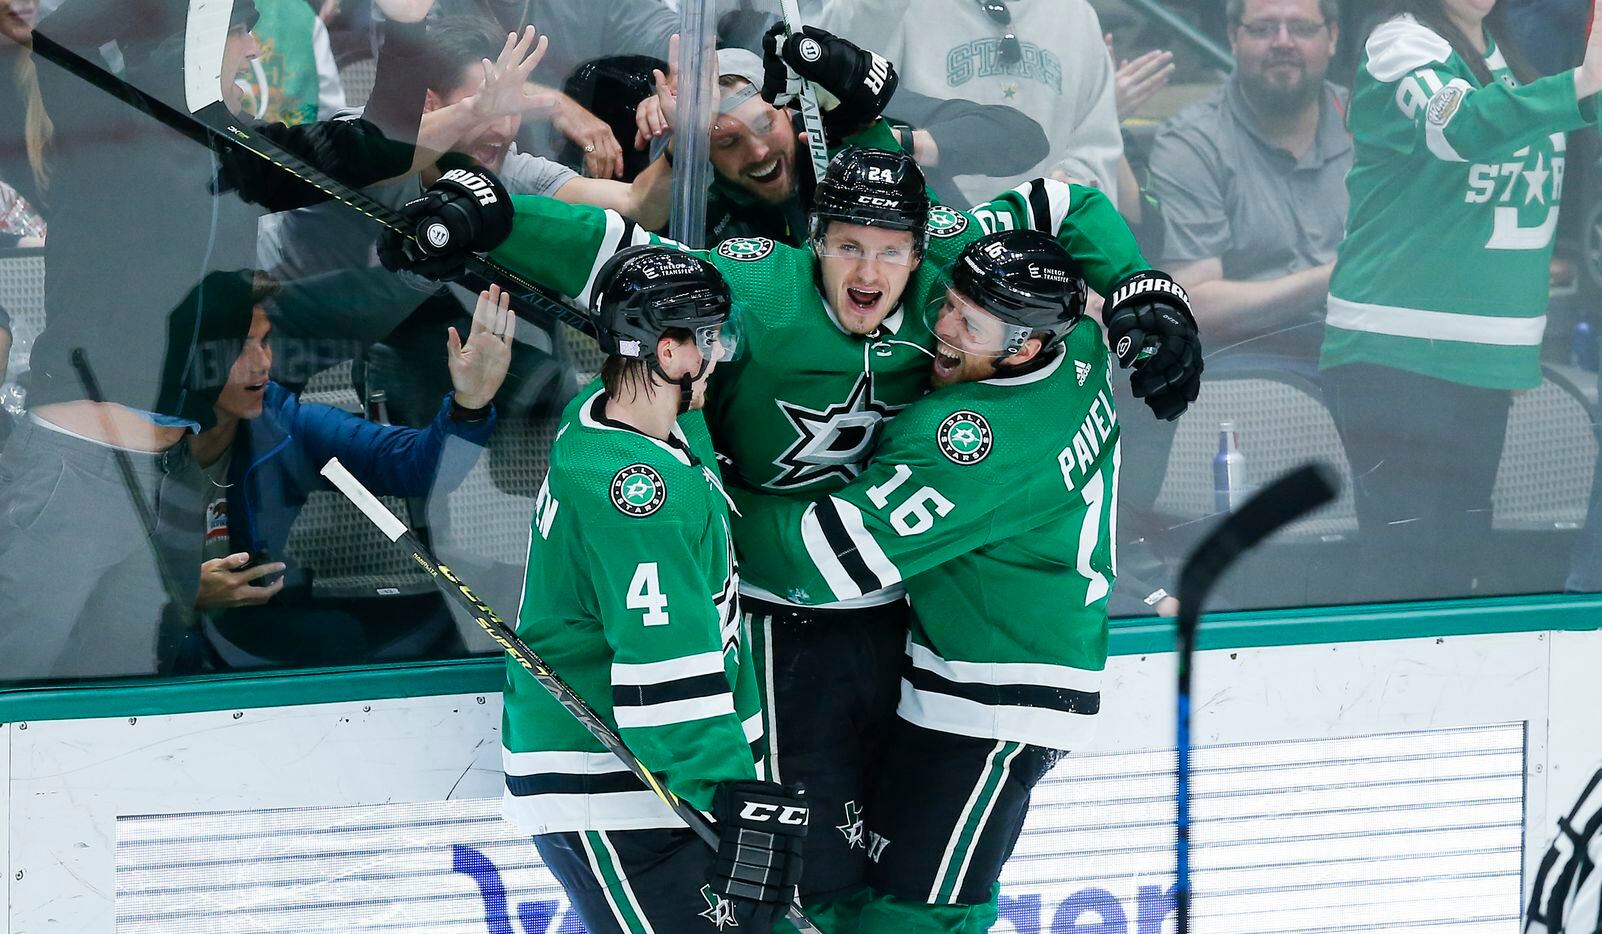 Dallas Stars forward Roope Hintz, center, is congratulated by defenseman Miro Heiskanen (4) and forward Joe Pavelski (16) after scoring a goal during the second period of an NHL hockey game against the Detroit Red Wings, Tuesday, November 16, 2021.